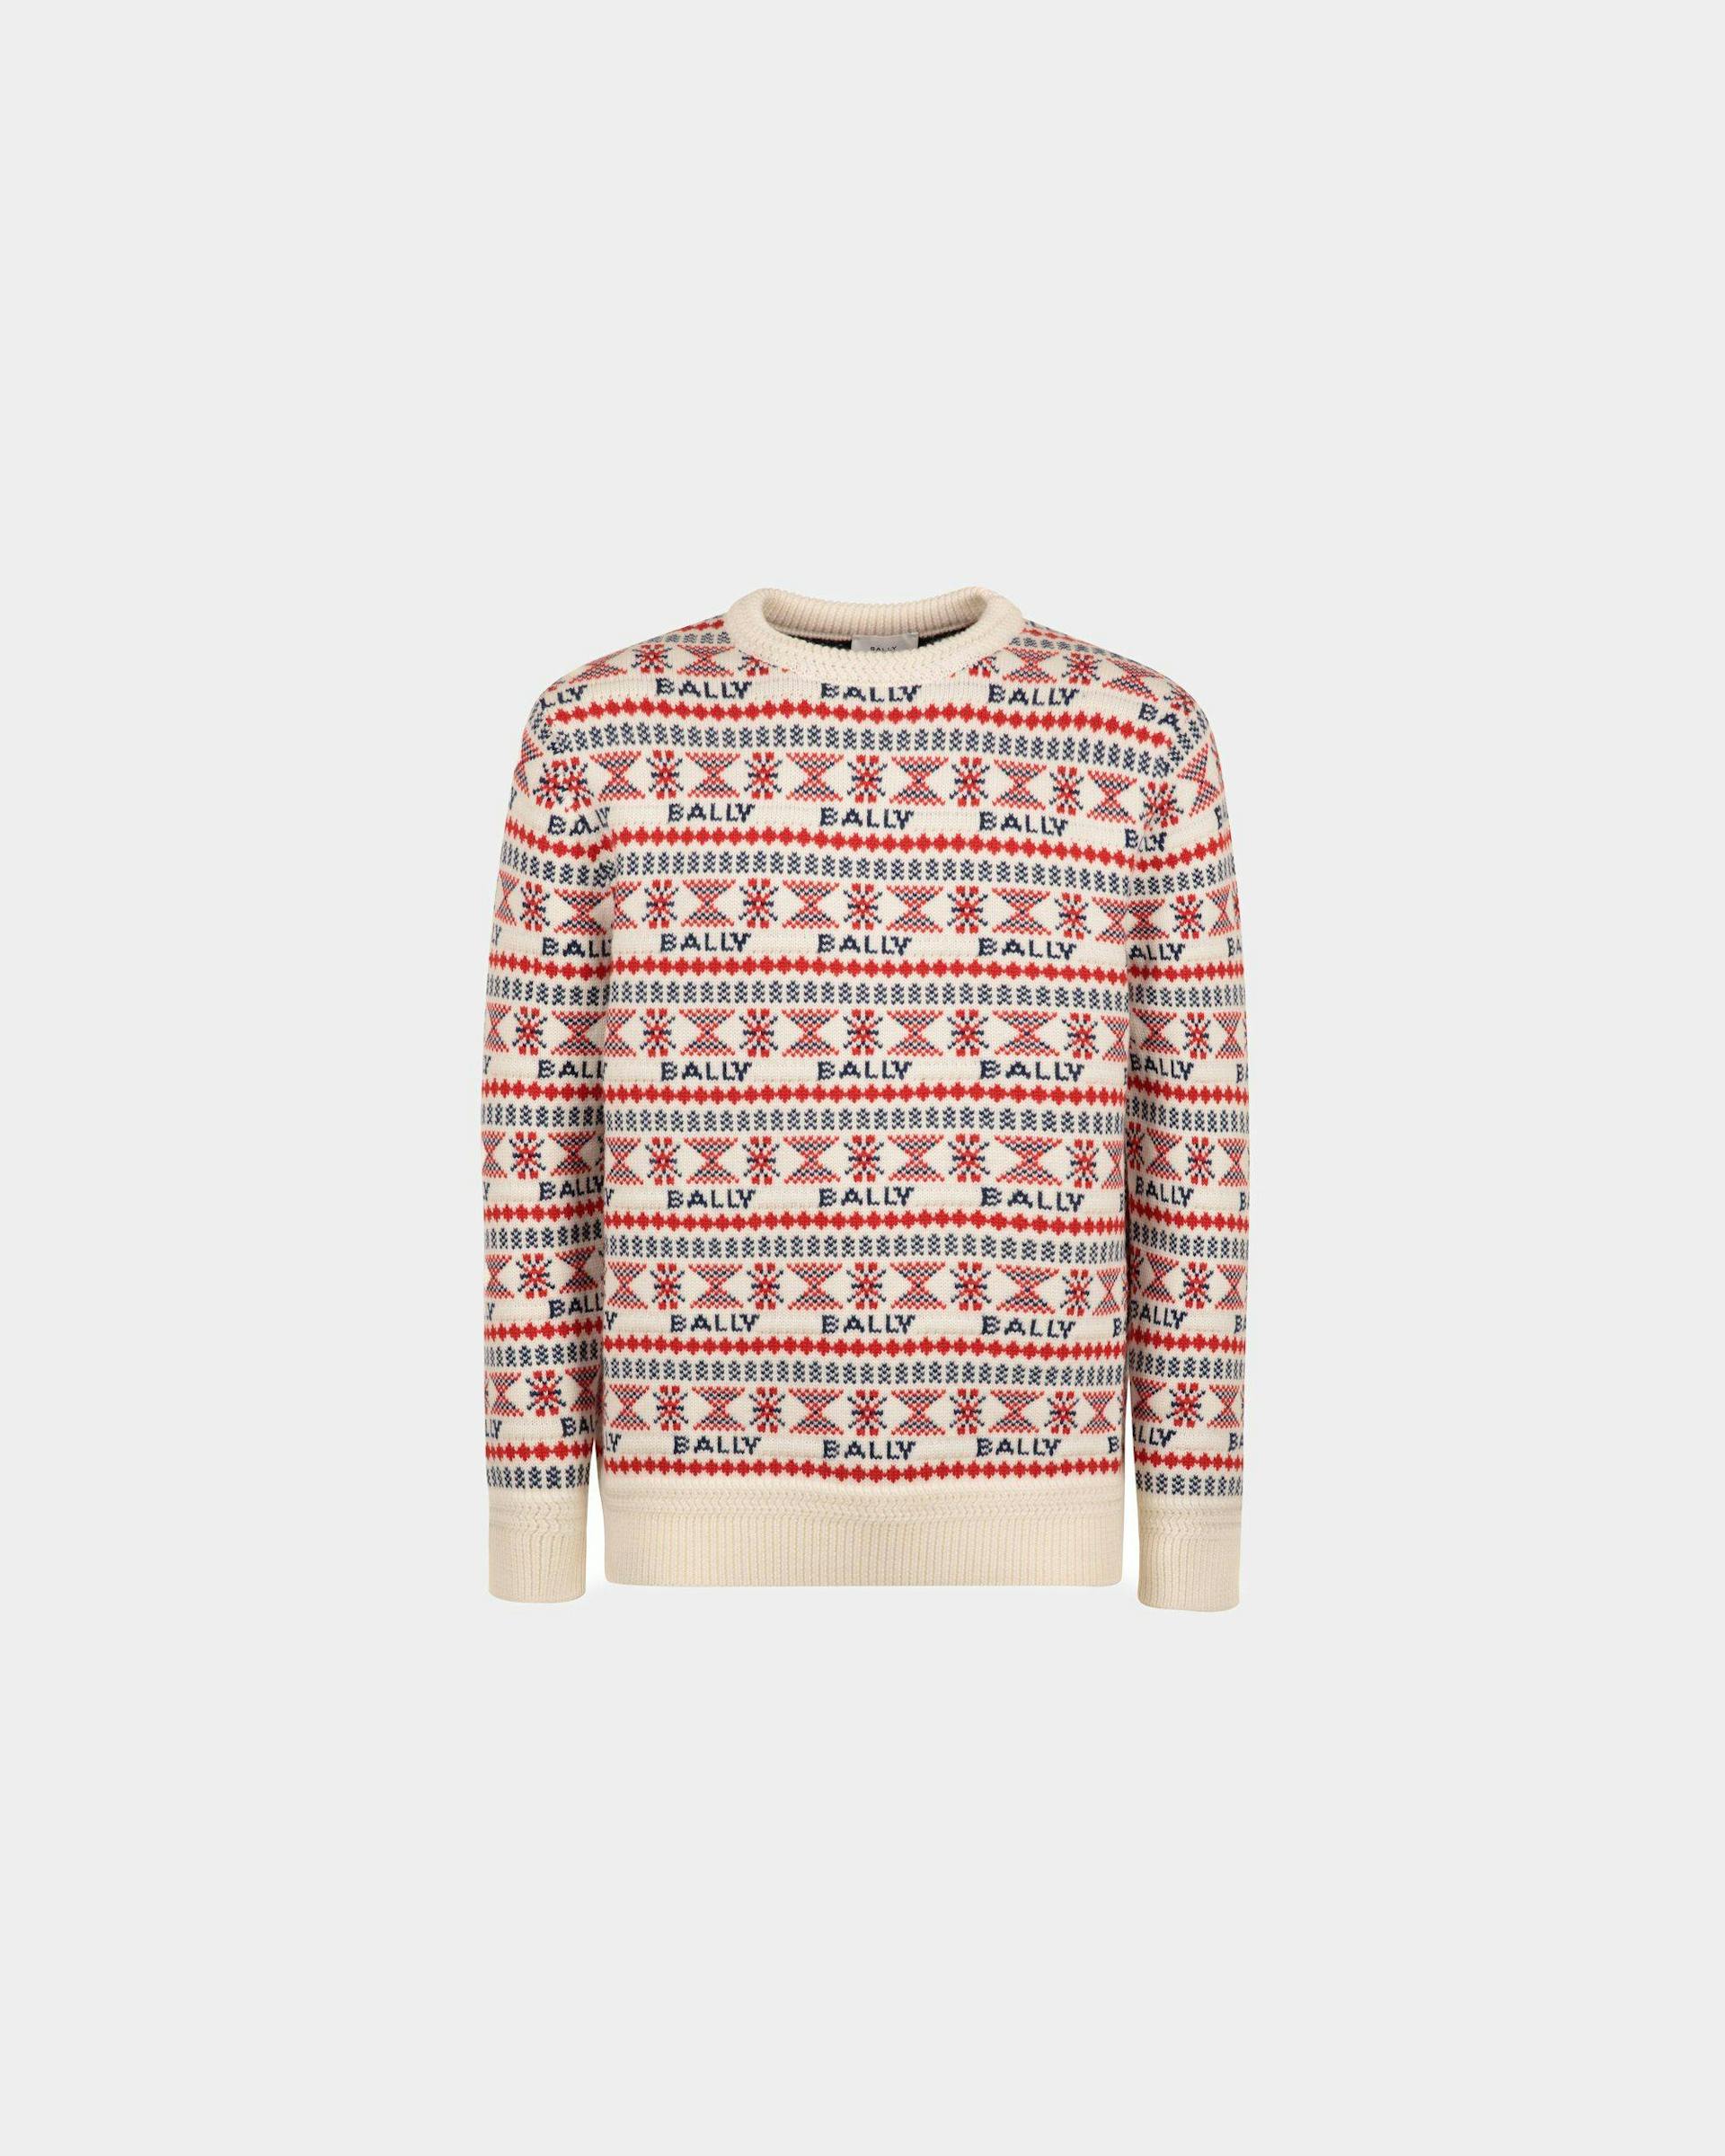 Men's Sweater In Multicolor Wool | Bally | Still Life Front